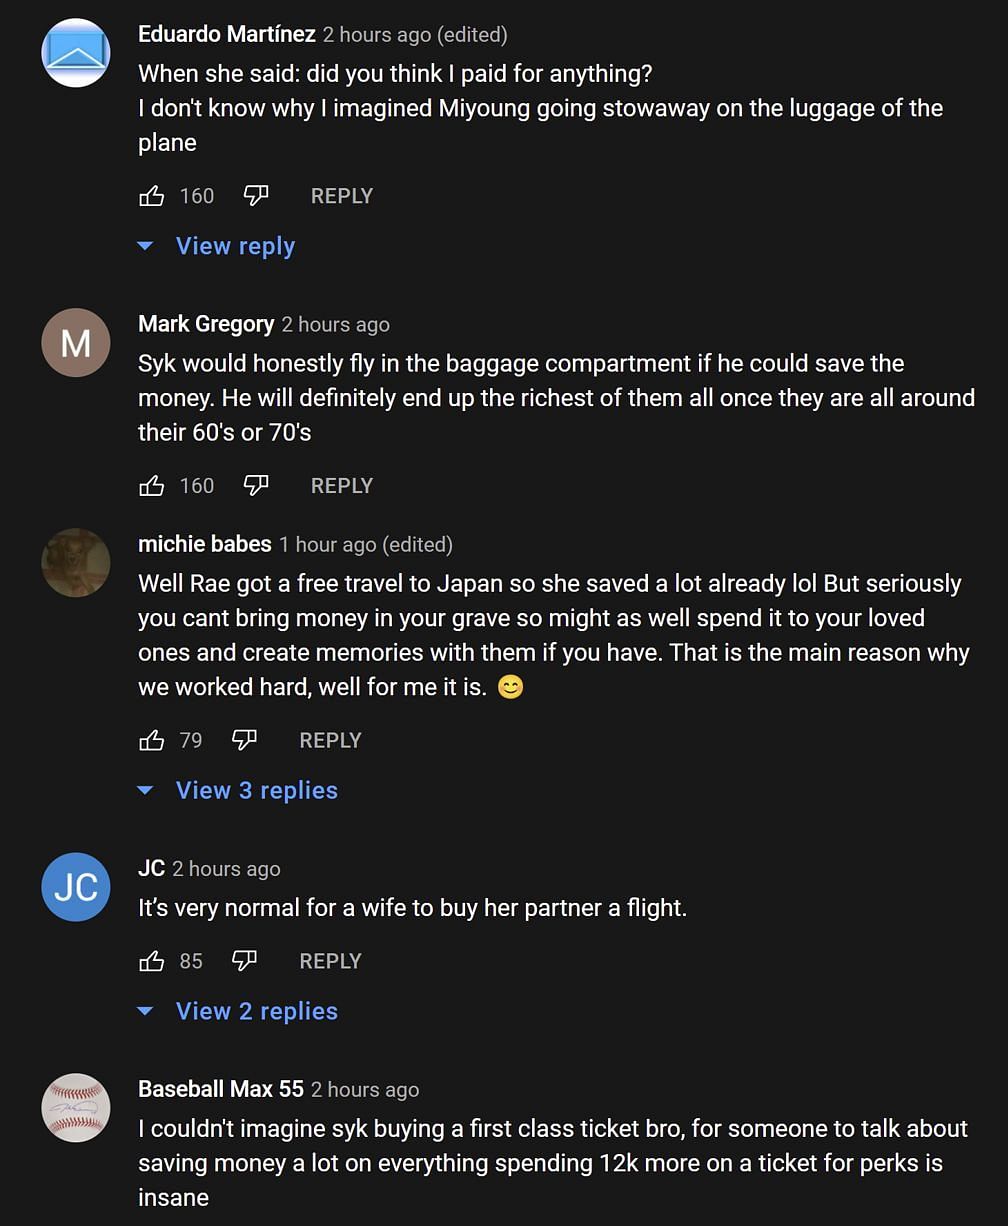 Fans provide their take on Valkyrae paying $18,000 for a first-class ticket 1/2 (Image via Shrimp Funny/YouTube)